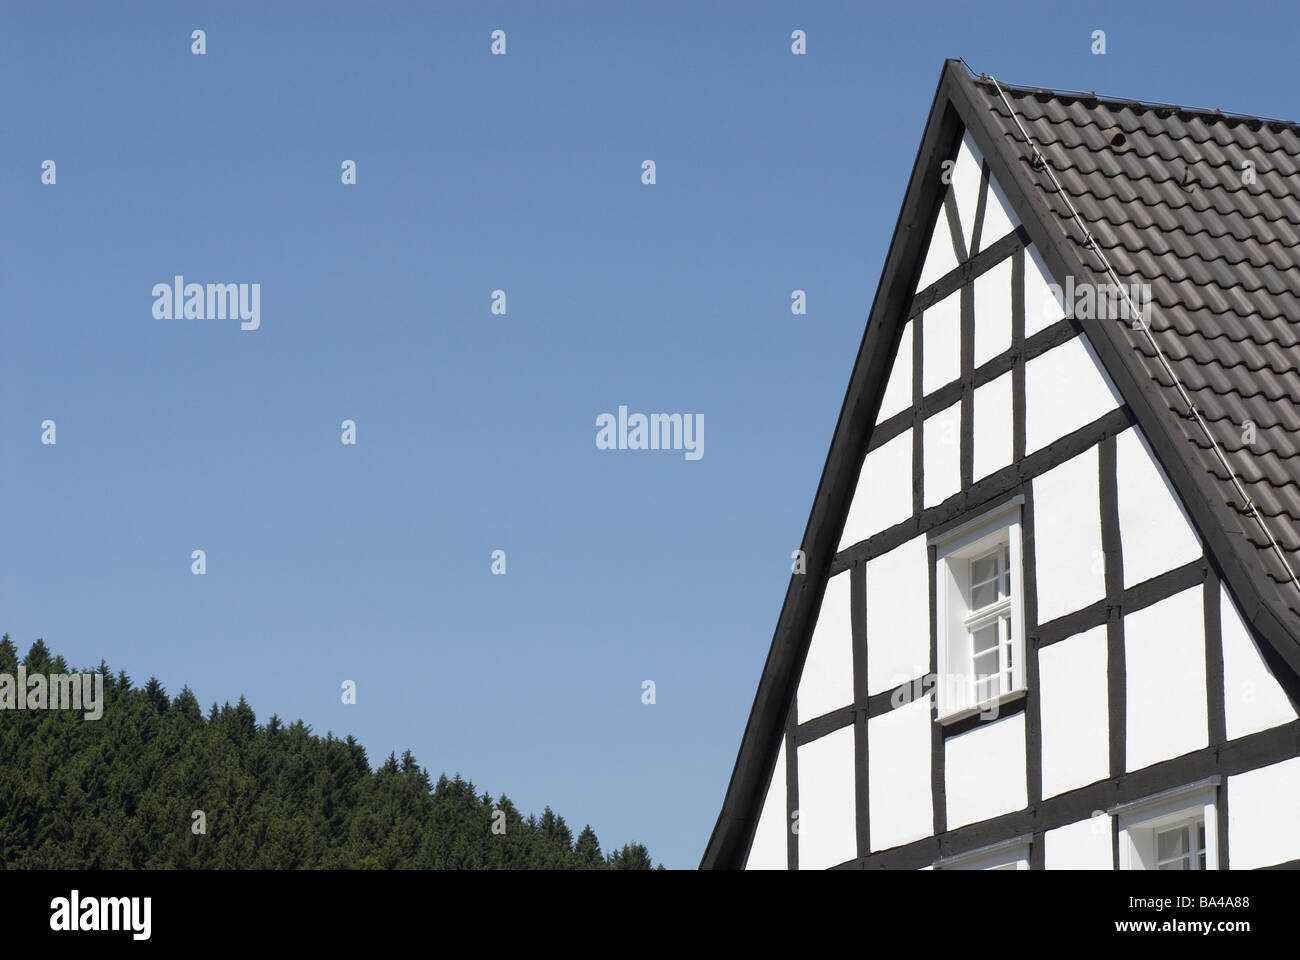 Timbering-house detail windows rung-windows roof roof tiles heavens forest trees Germany Bergisches country North Stock Photo